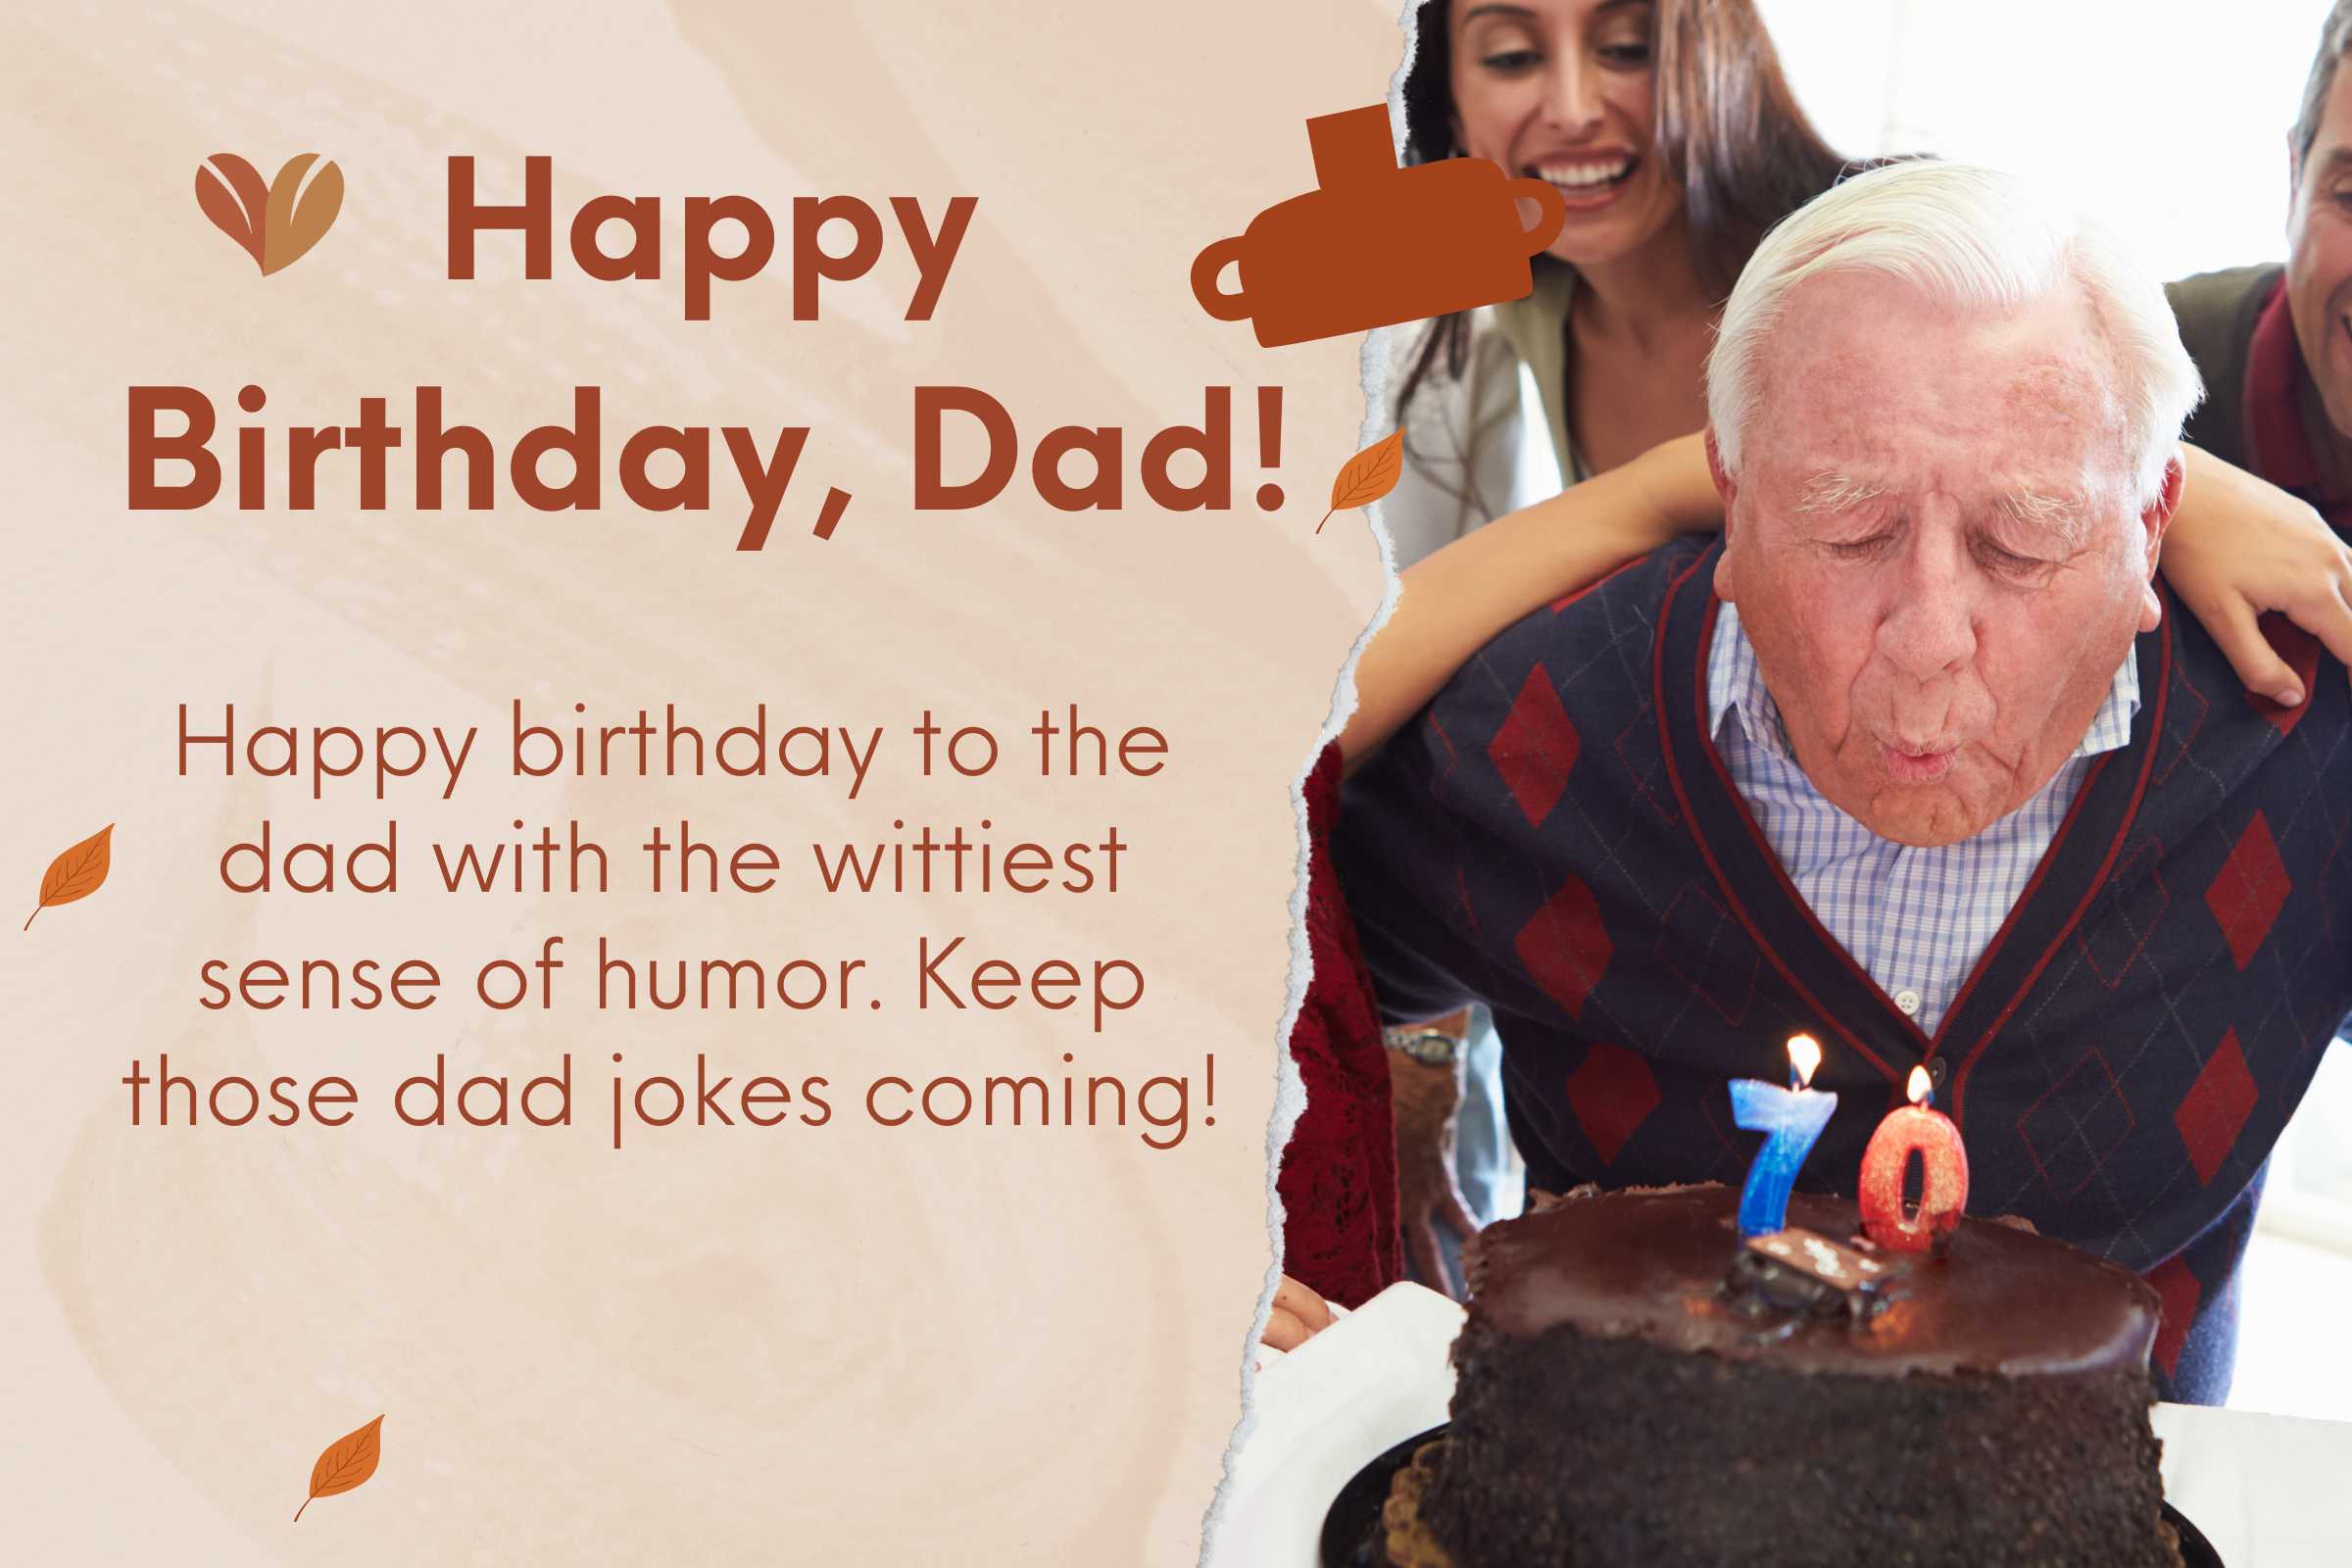 Sending you a laugh-filled birthday with best birthday wishes for dad